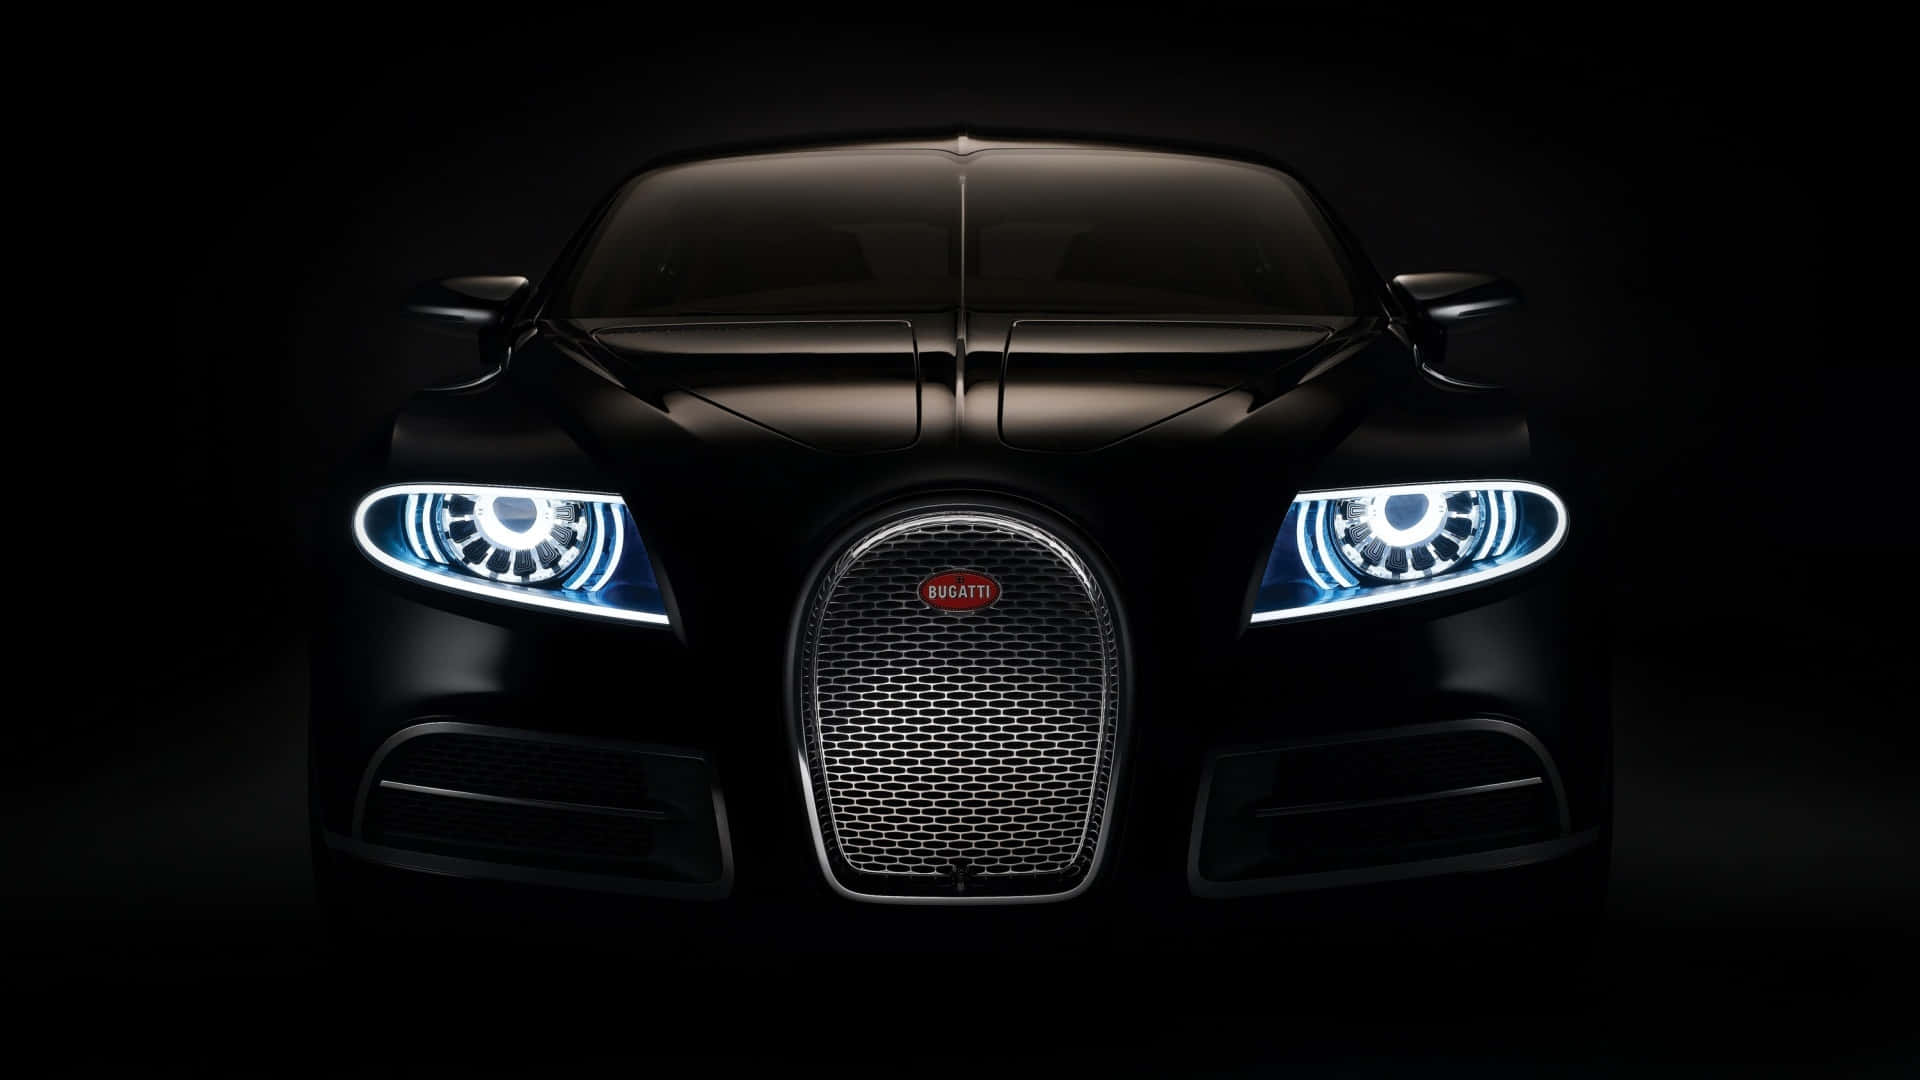 Mysterious Luxury Car Front View Wallpaper